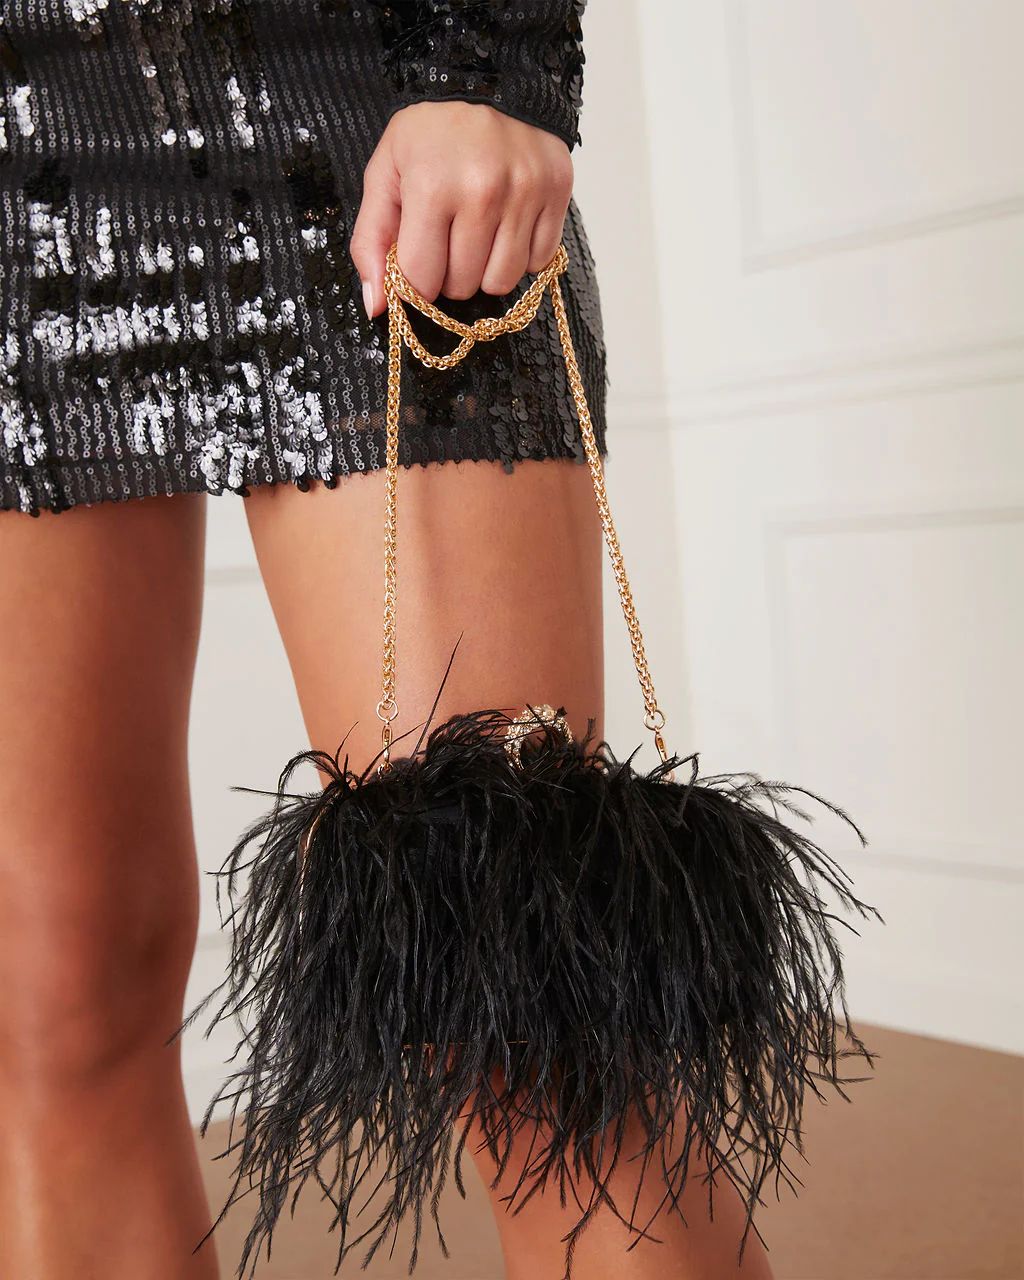 Emily Ostrich Feather Bag | VICI Collection